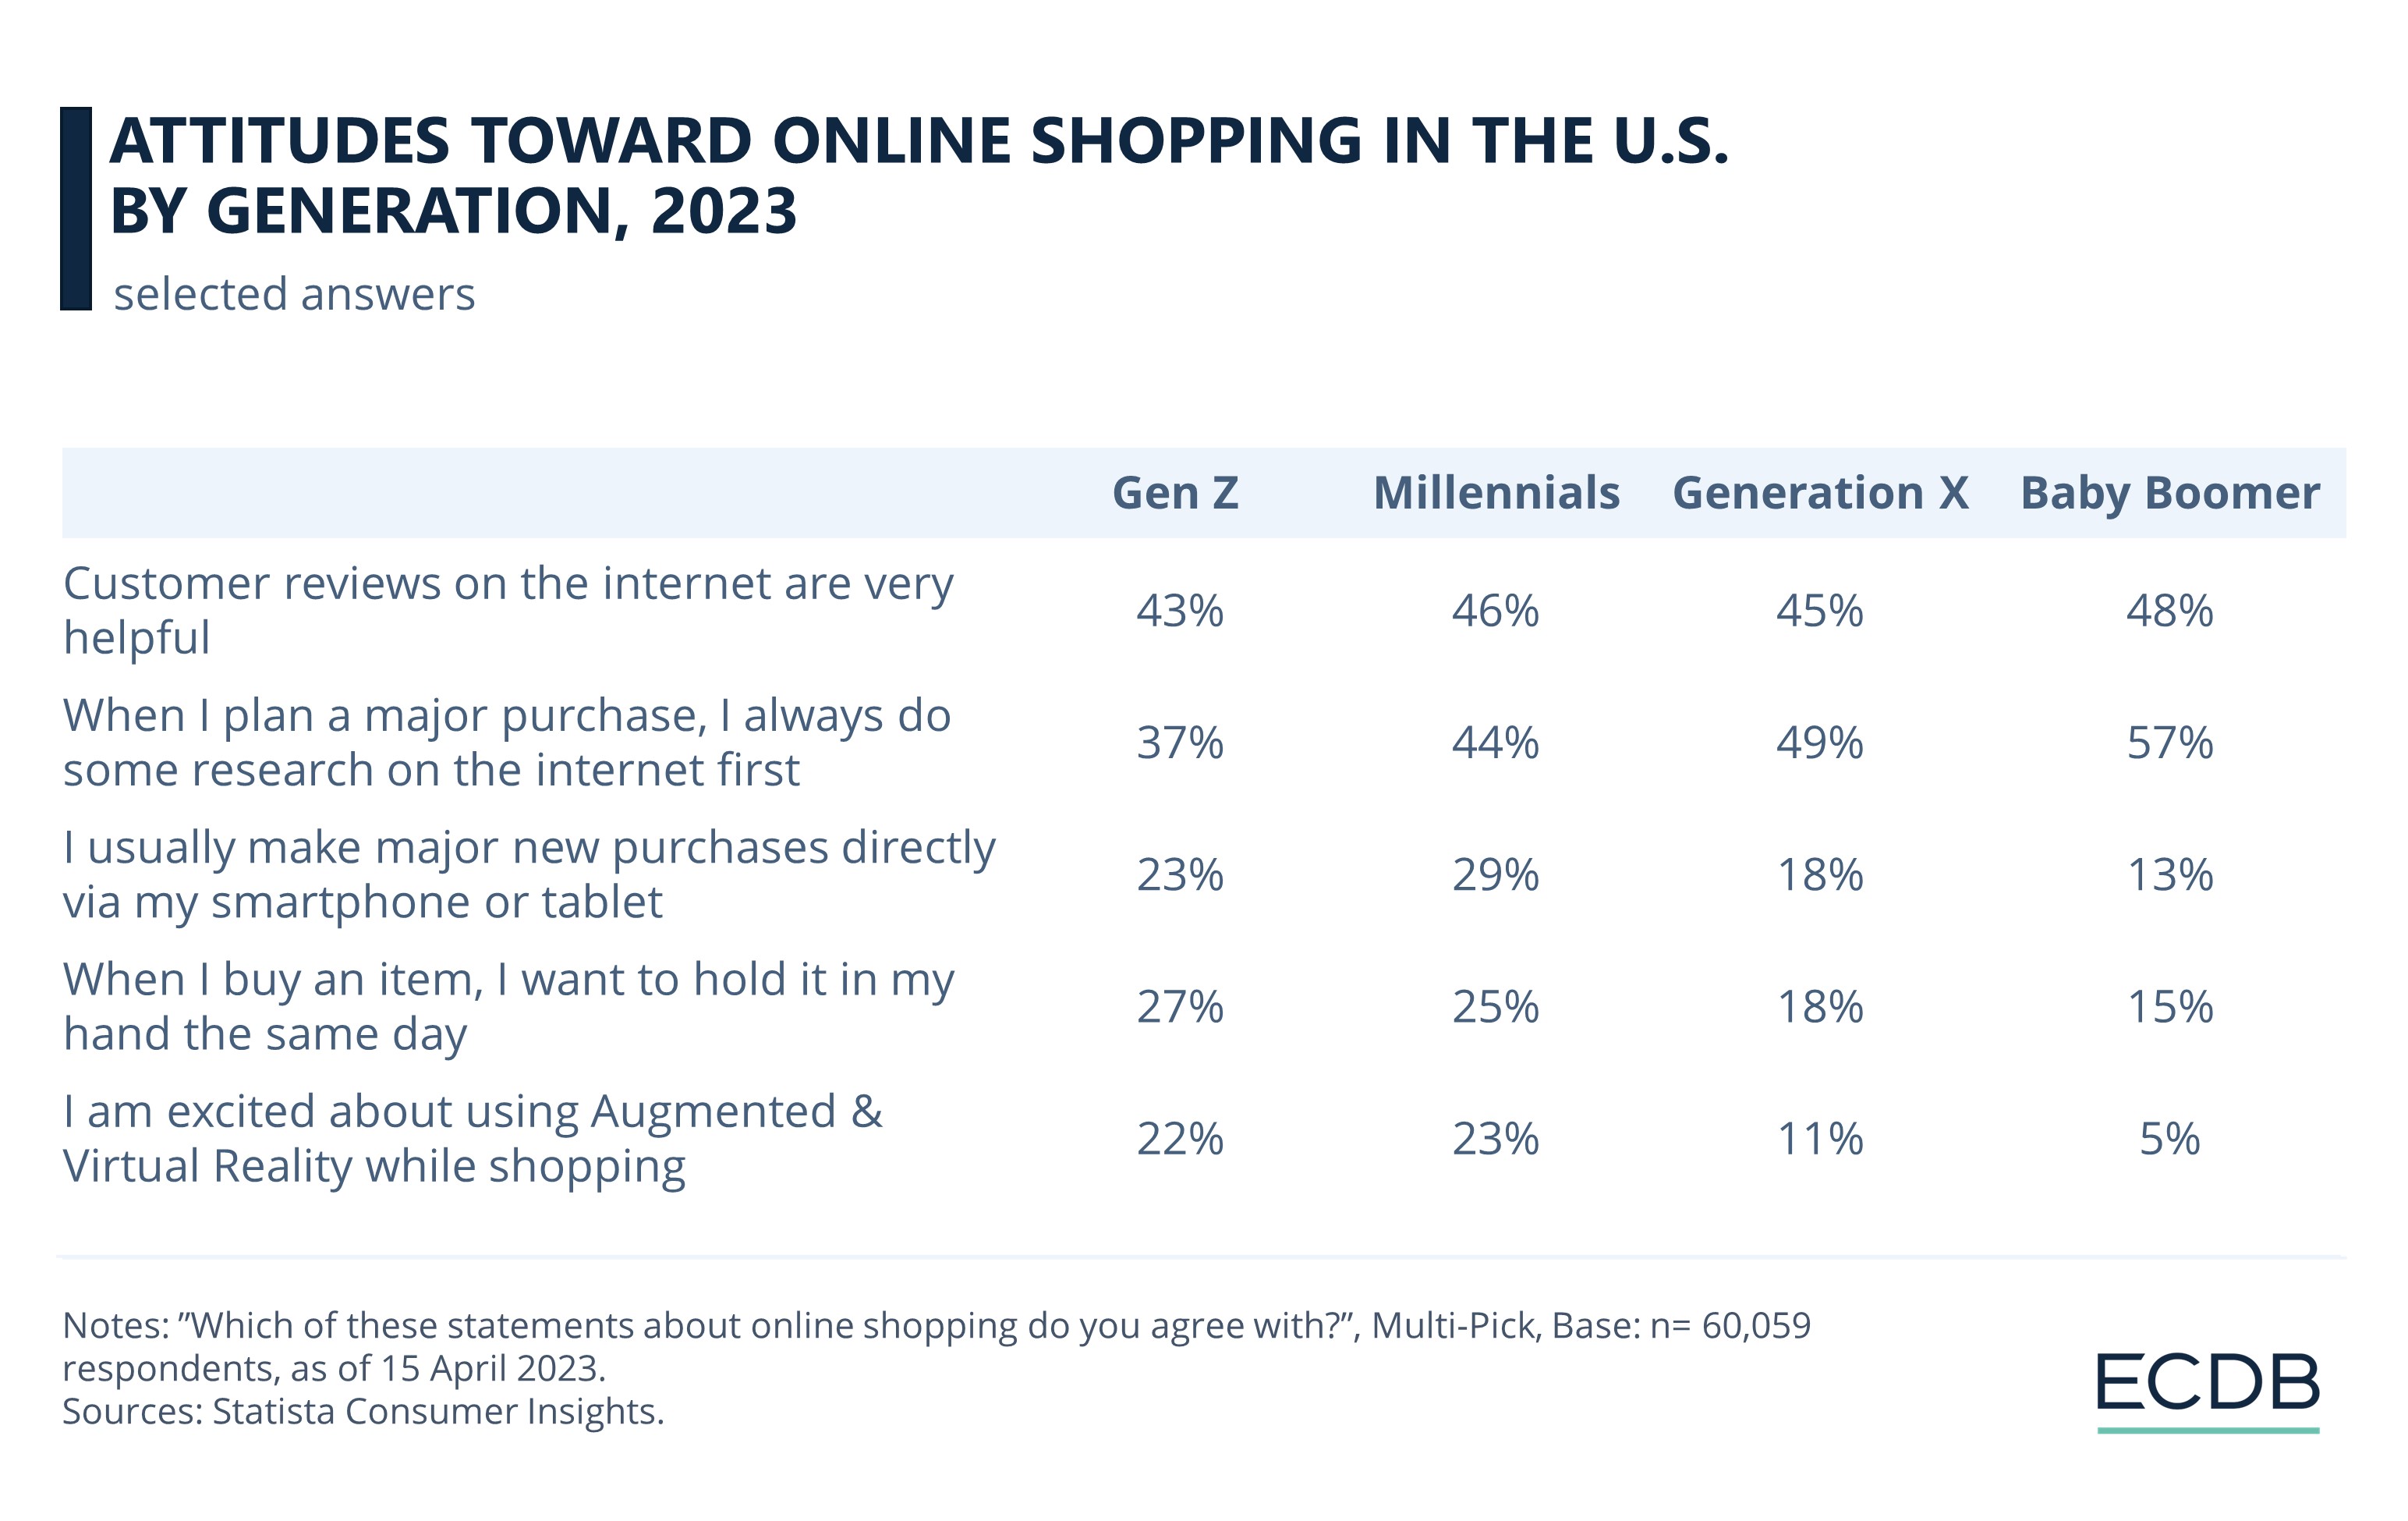 Attitudes Toward Online Shopping In The U.S. By Generation, 2023